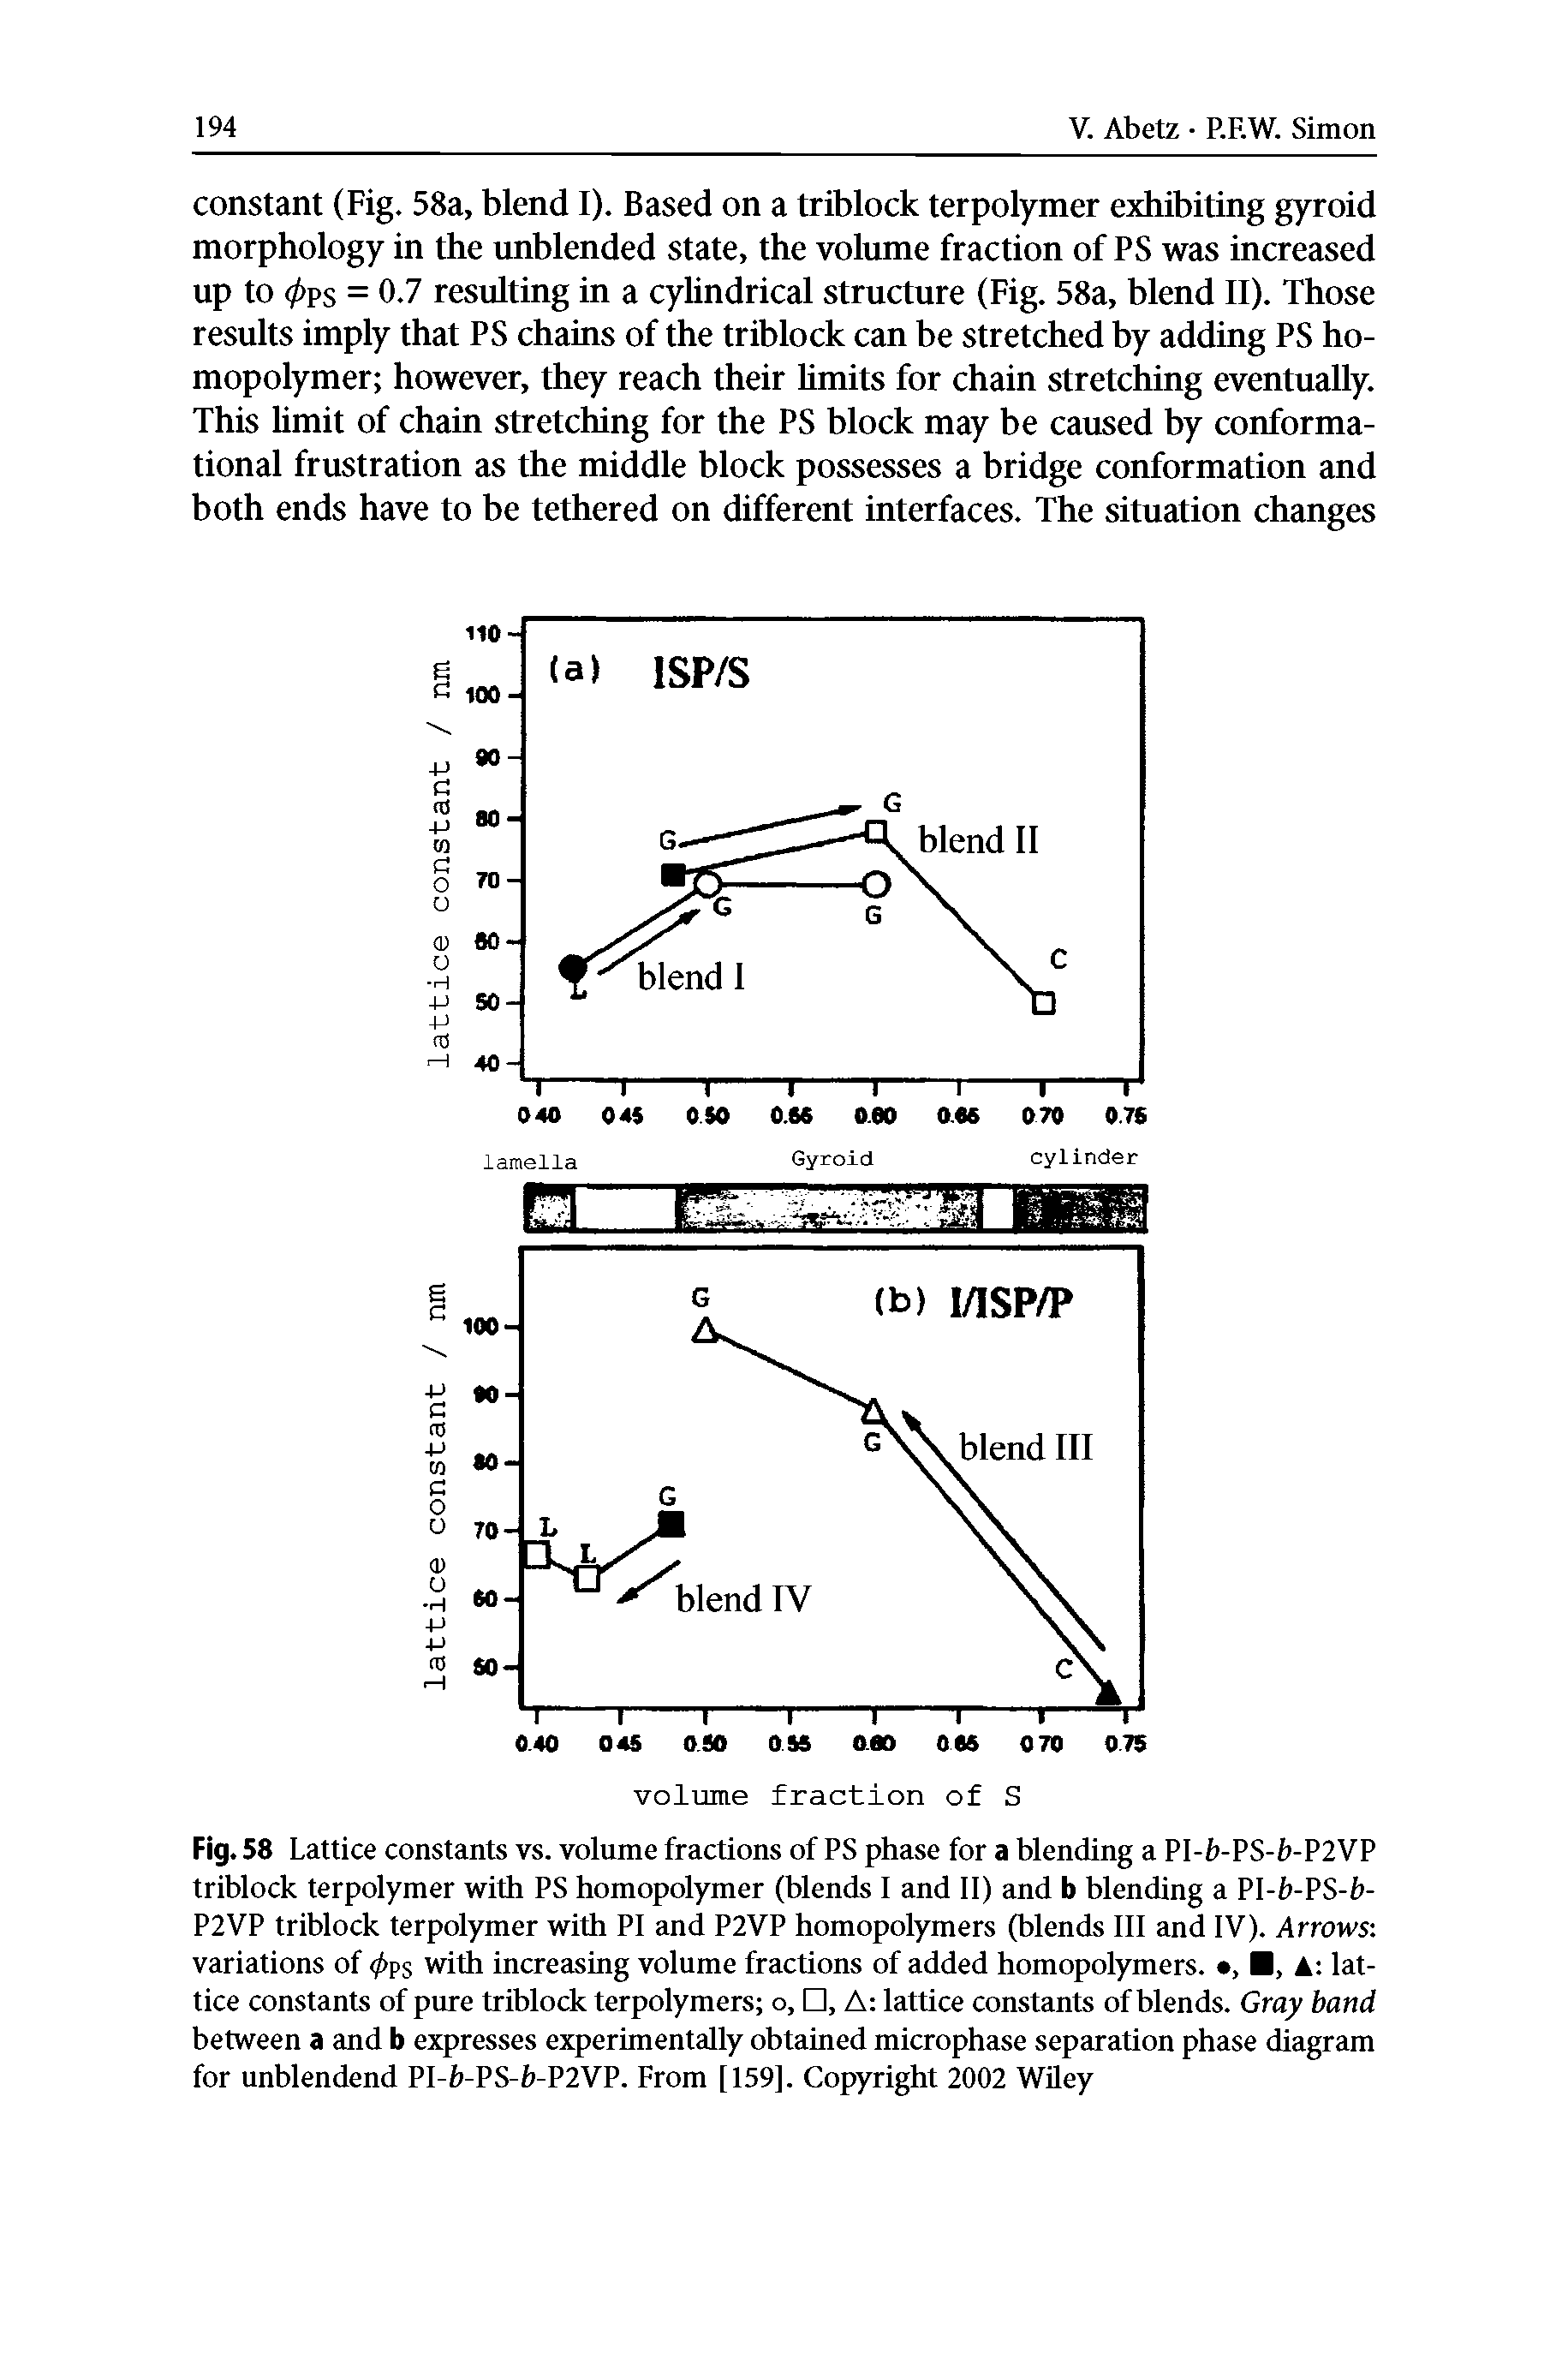 Fig. 58 Lattice constants vs. volume fractions of PS phase for a blending a PI-0-PS-0-P2VP triblock terpolymer with PS homopolymer (blends I and II) and b blending a Pl-fr-PS-fr-P2VP triblock terpolymer with PI and P2VP homopolymers (blends III and IV). Arrows variations of </>ps with increasing volume fractions of added homopolymers. , , lattice constants of pure triblock terpolymers o, , A lattice constants of blends. Gray band between a and b expresses experimentally obtained microphase separation phase diagram for unblendend PI-6-PS-6-P2VP. From [159], Copyright 2002 Wiley...